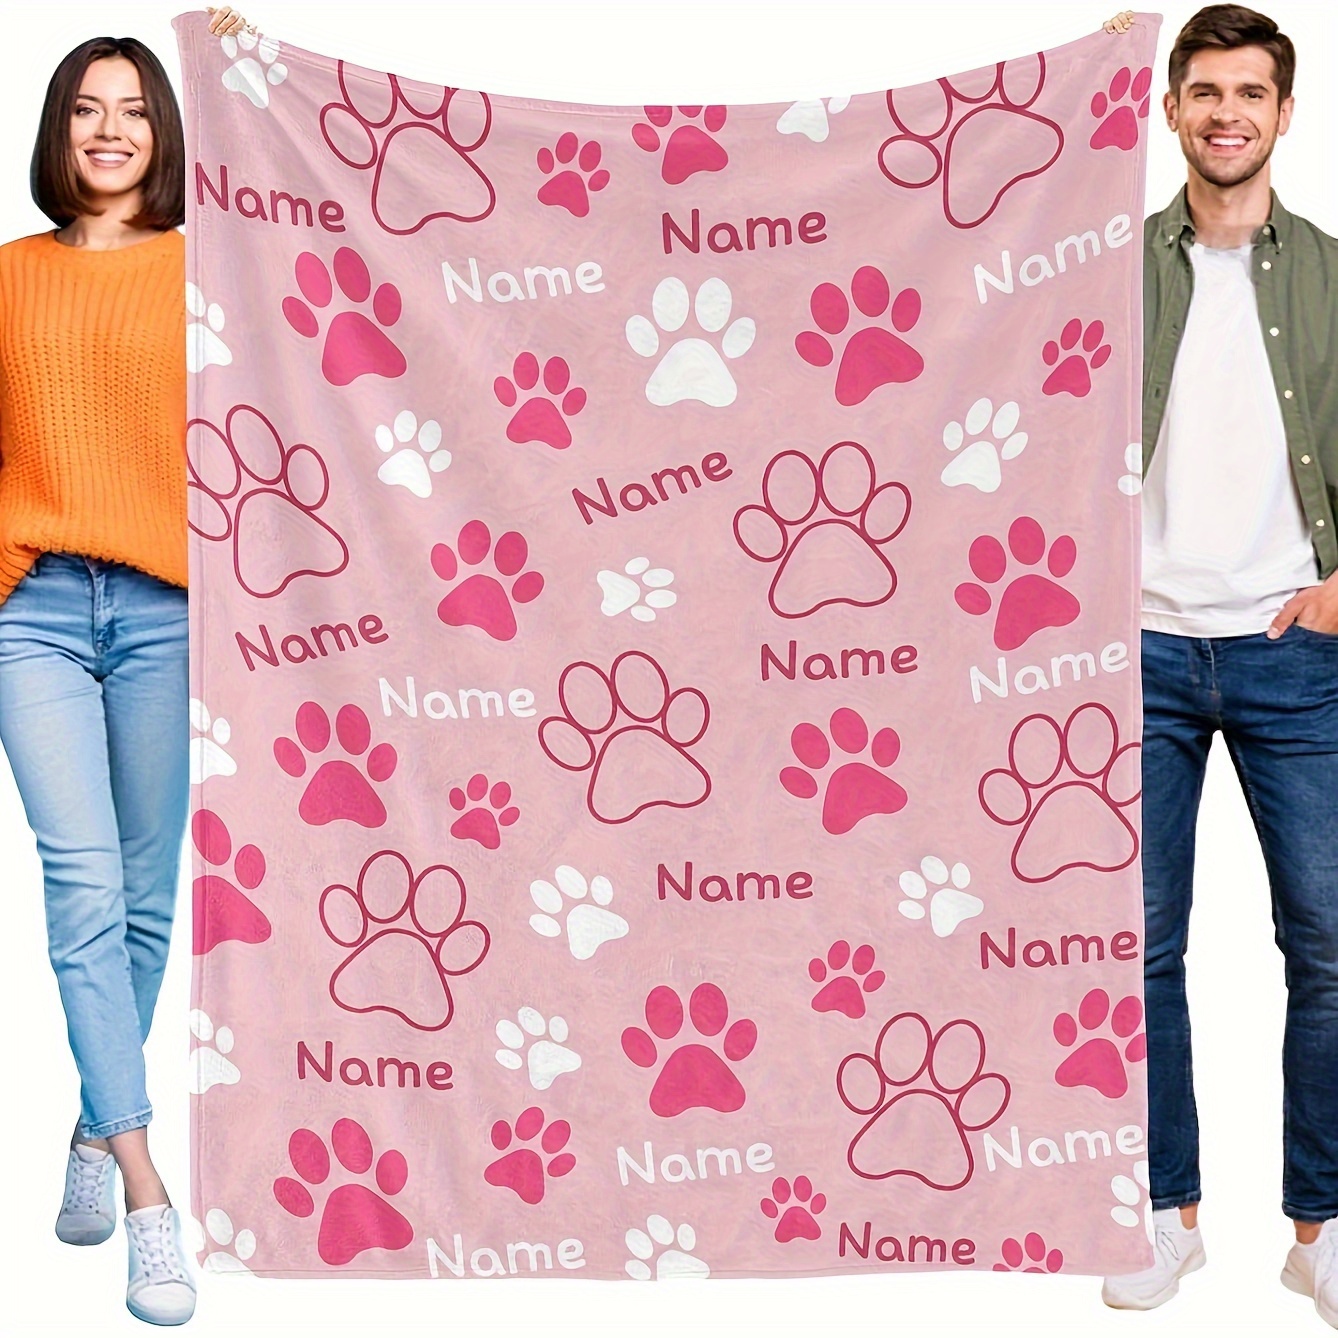 

Customizable Pet Blanket For Dogs, Personalized Dog Name Print, Soft Polyester Fleece, Machine Washable, Multi-purpose For Outdoor, Camping, Car, Sofa Throw, Office - Ideal Gift For Dog Lovers